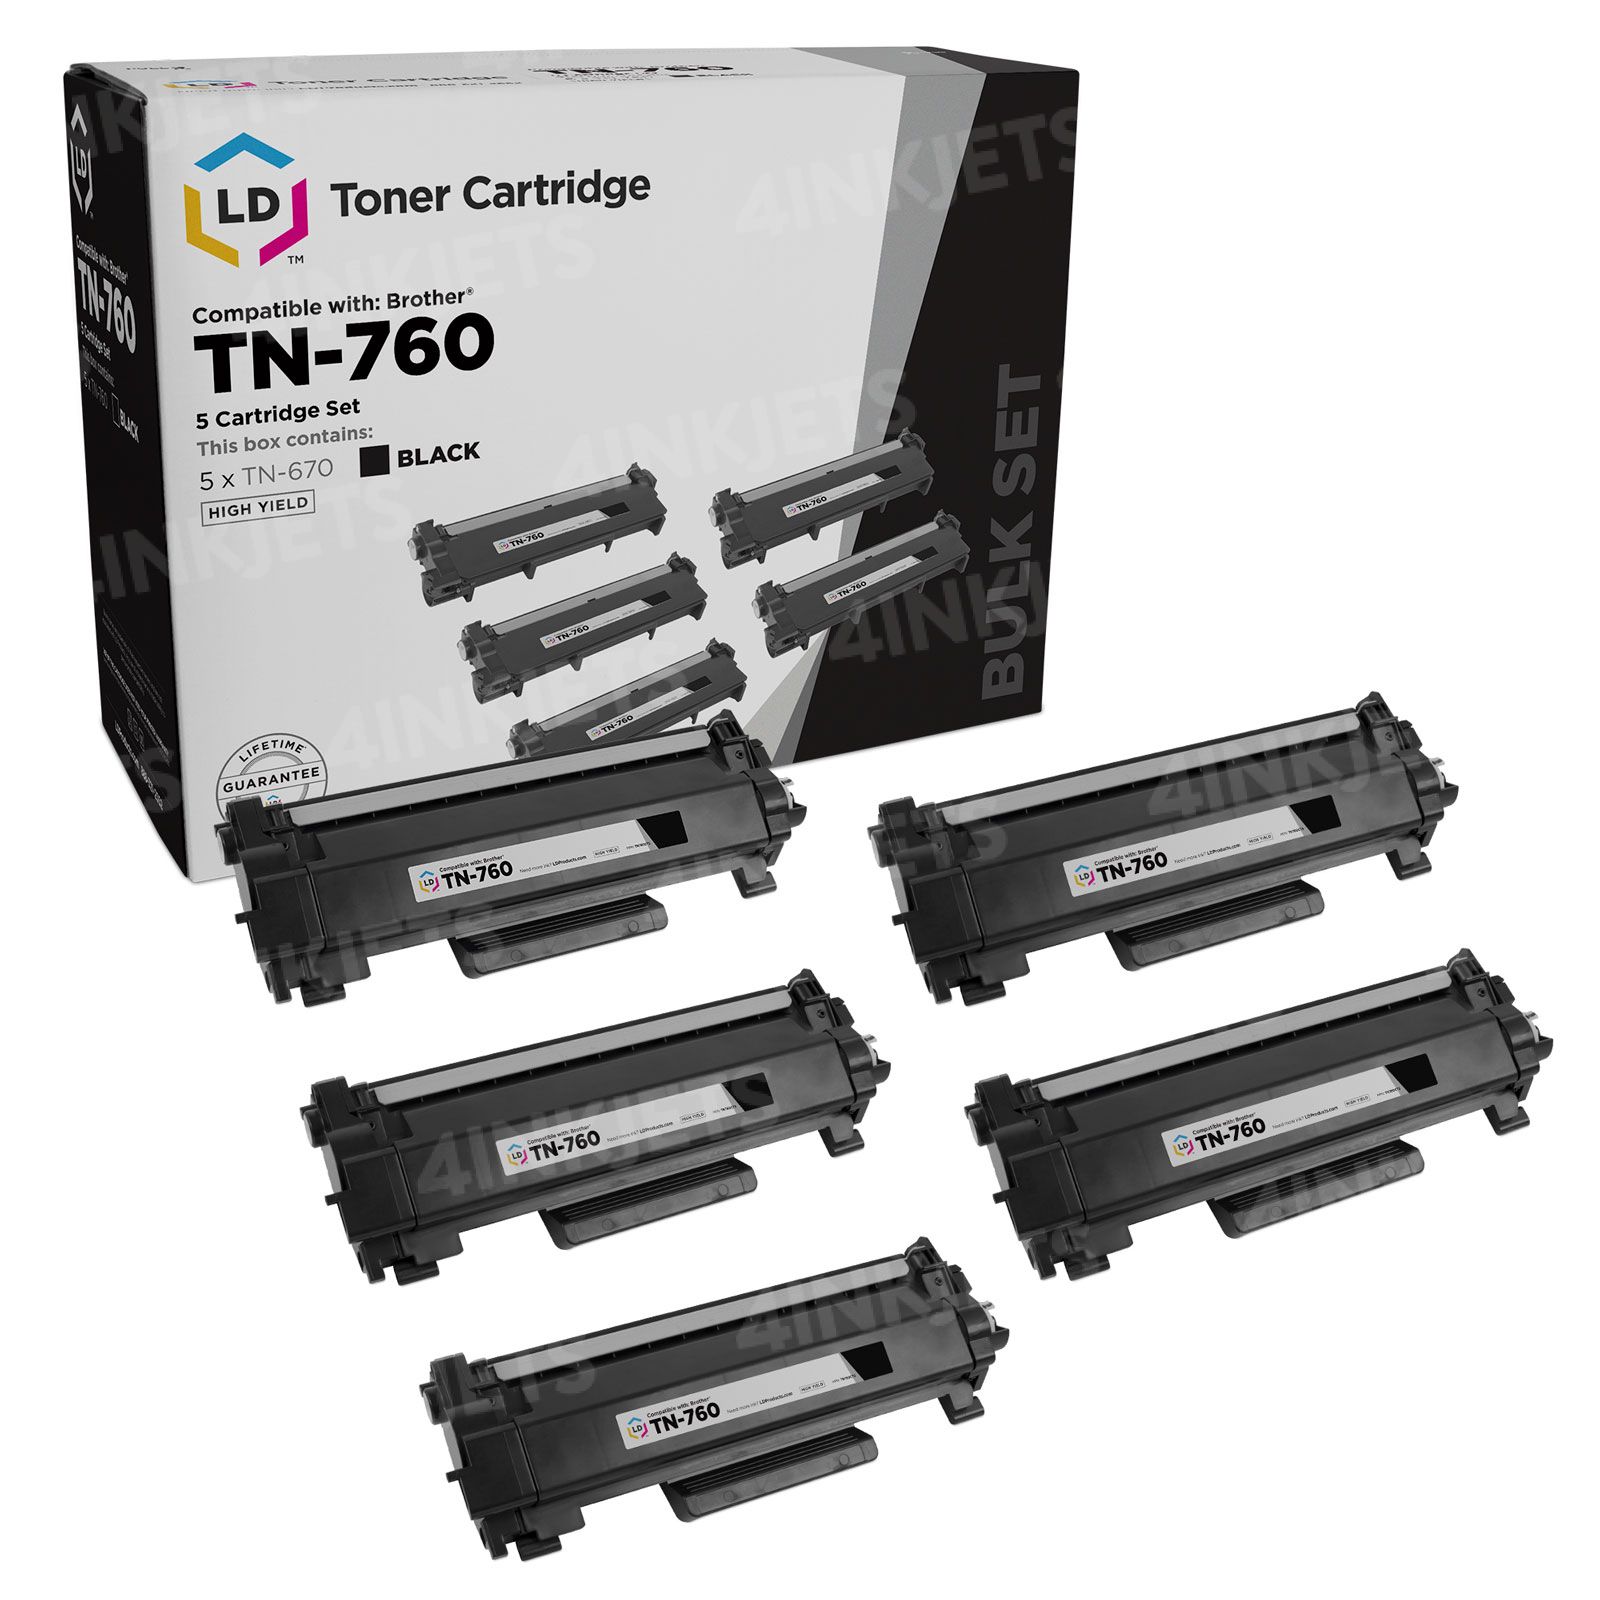 Brother TN 760 Black High Yield Toner Cartridge, Up to 3,000 Pages